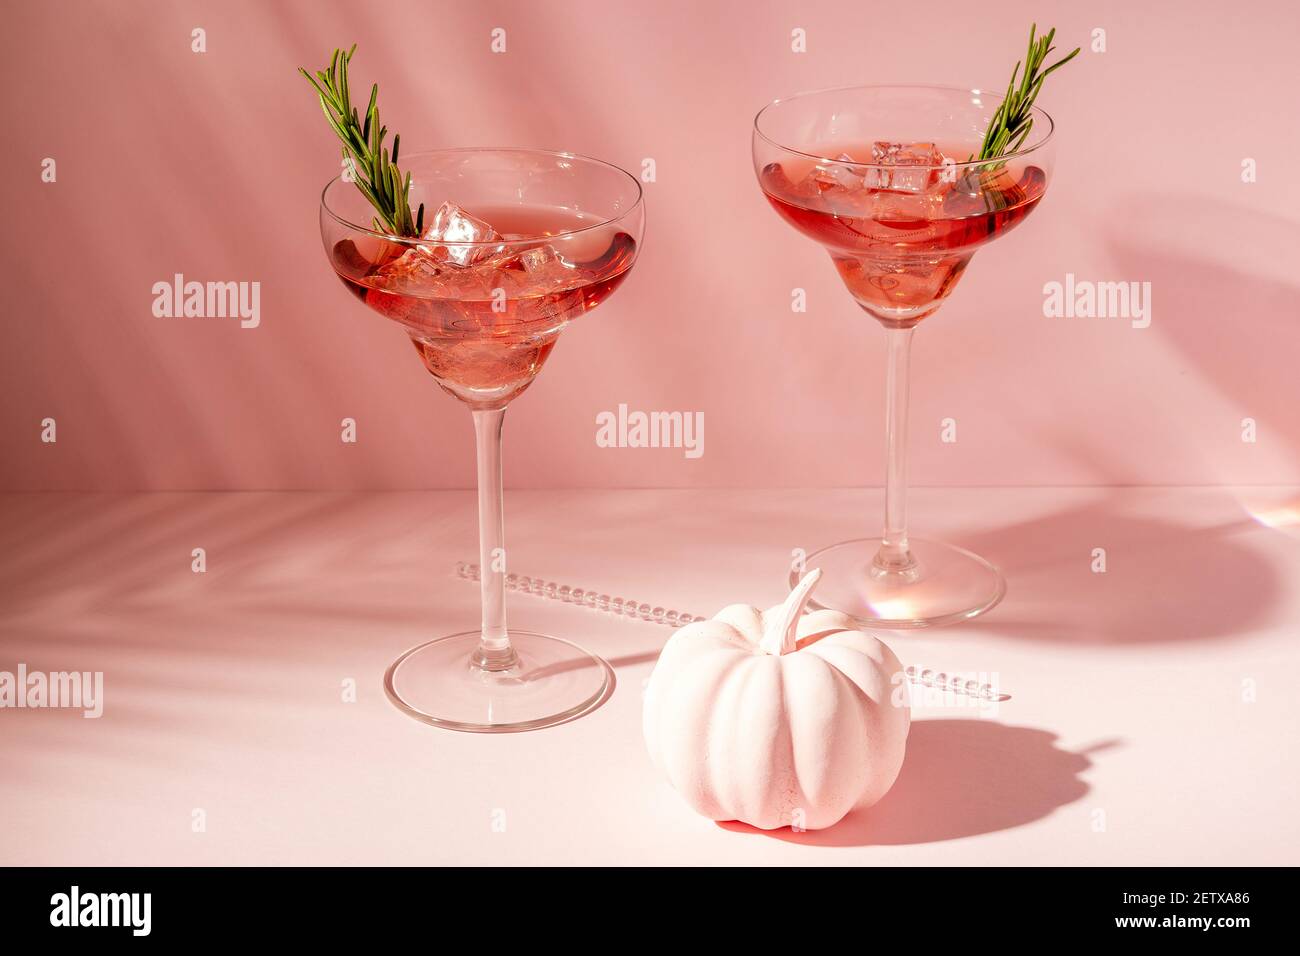 Halloween minimal concept with pink pumpkin and cocktails. Creative holiday party background. Stock Photo